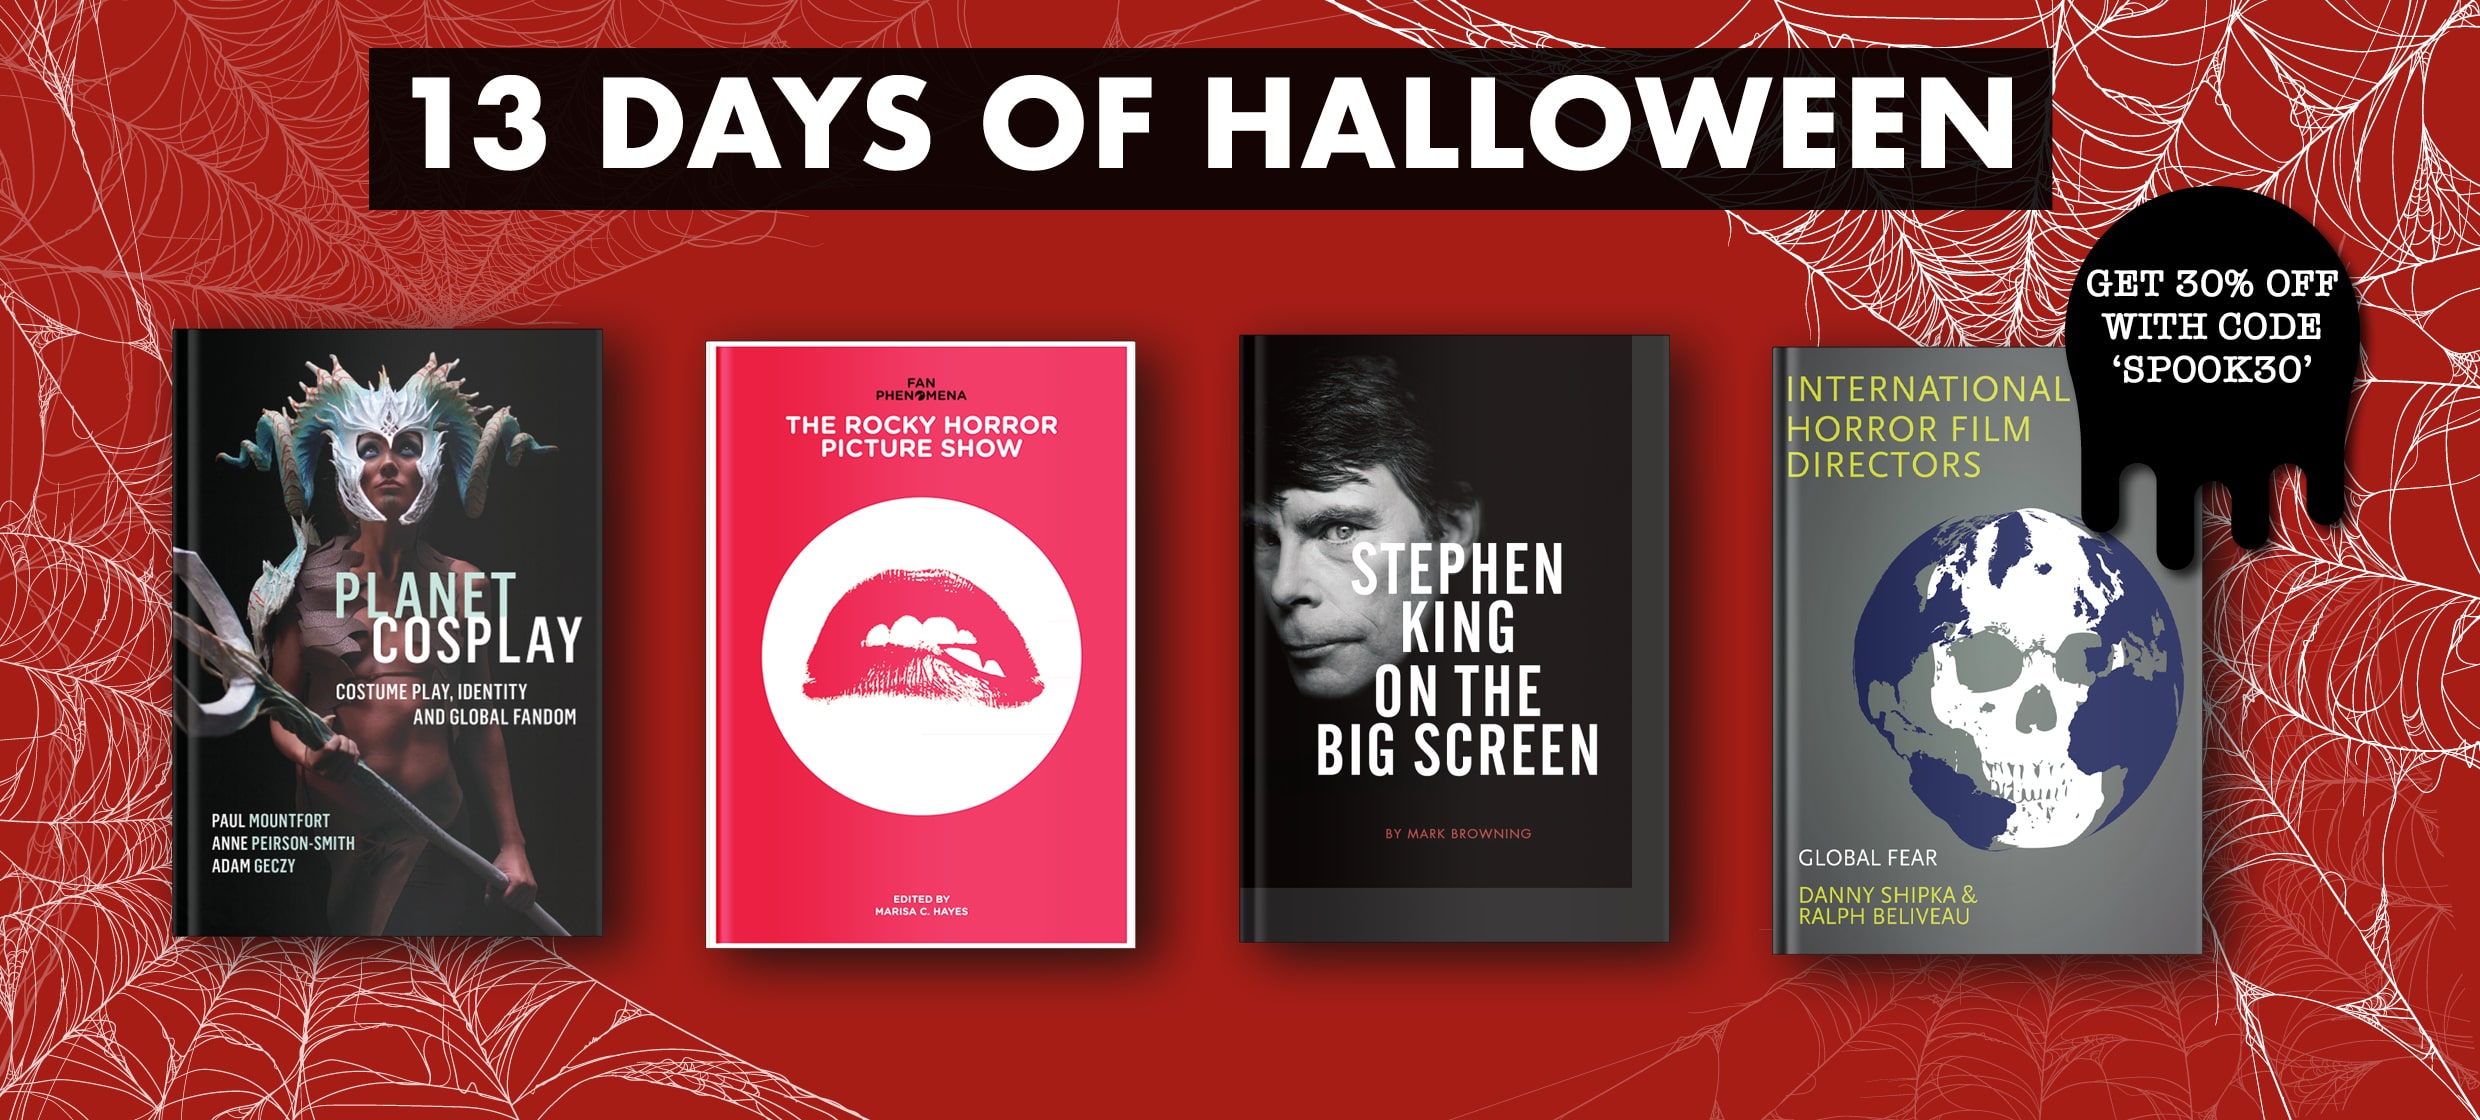 Celebrate Spooky Season with Intellect's 13 Days of Halloween!